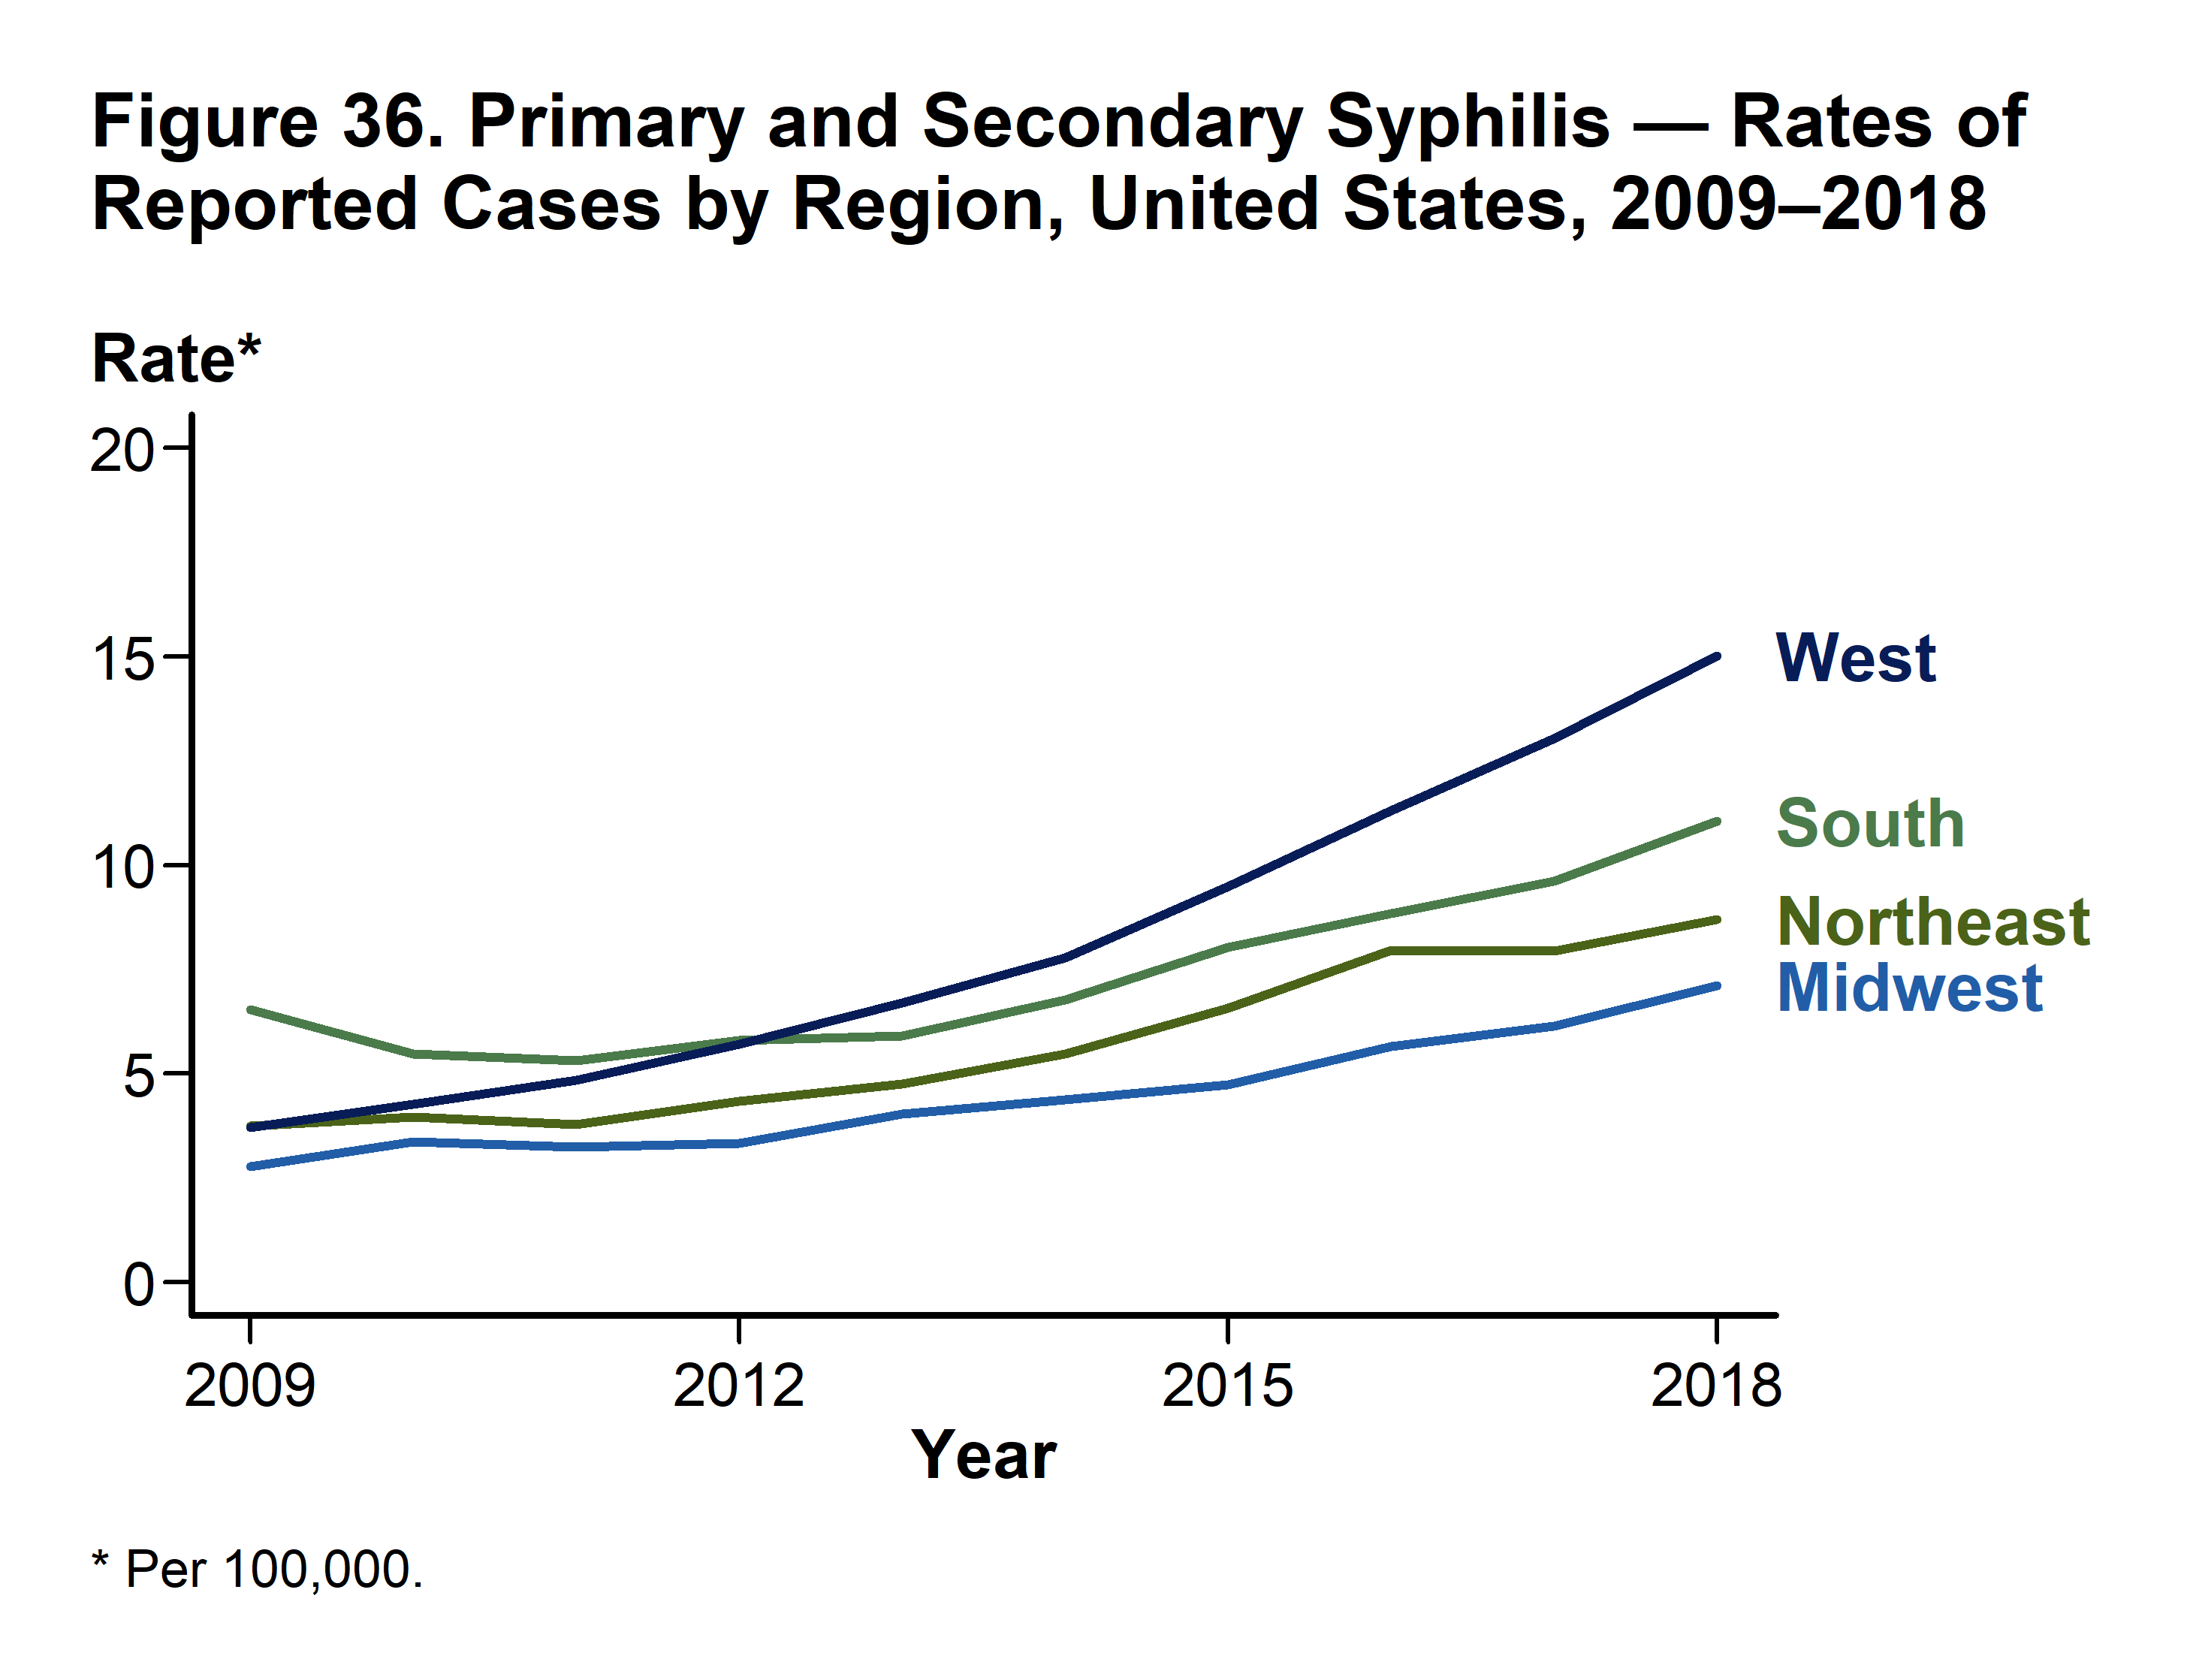 Rates of reported cases of primary and secondary syphilis in the U.S. by region, 2009-2018. In 2018, the West had the highest rate of reported P&S syphilis cases (15.0 cases per 100,000 population), followed by the South (11.1 cases per 100,000 population), the Northeast (8.7 cases per 100,000 population), and the Midwest (7.1 cases per 100,000 population). During 2017–2018, the P&S syphilis rate increased 16.4% in the Midwest, 15.6% in the South, 15.4% in the West, and 10.1% in the Northeast. Graphic: CDC